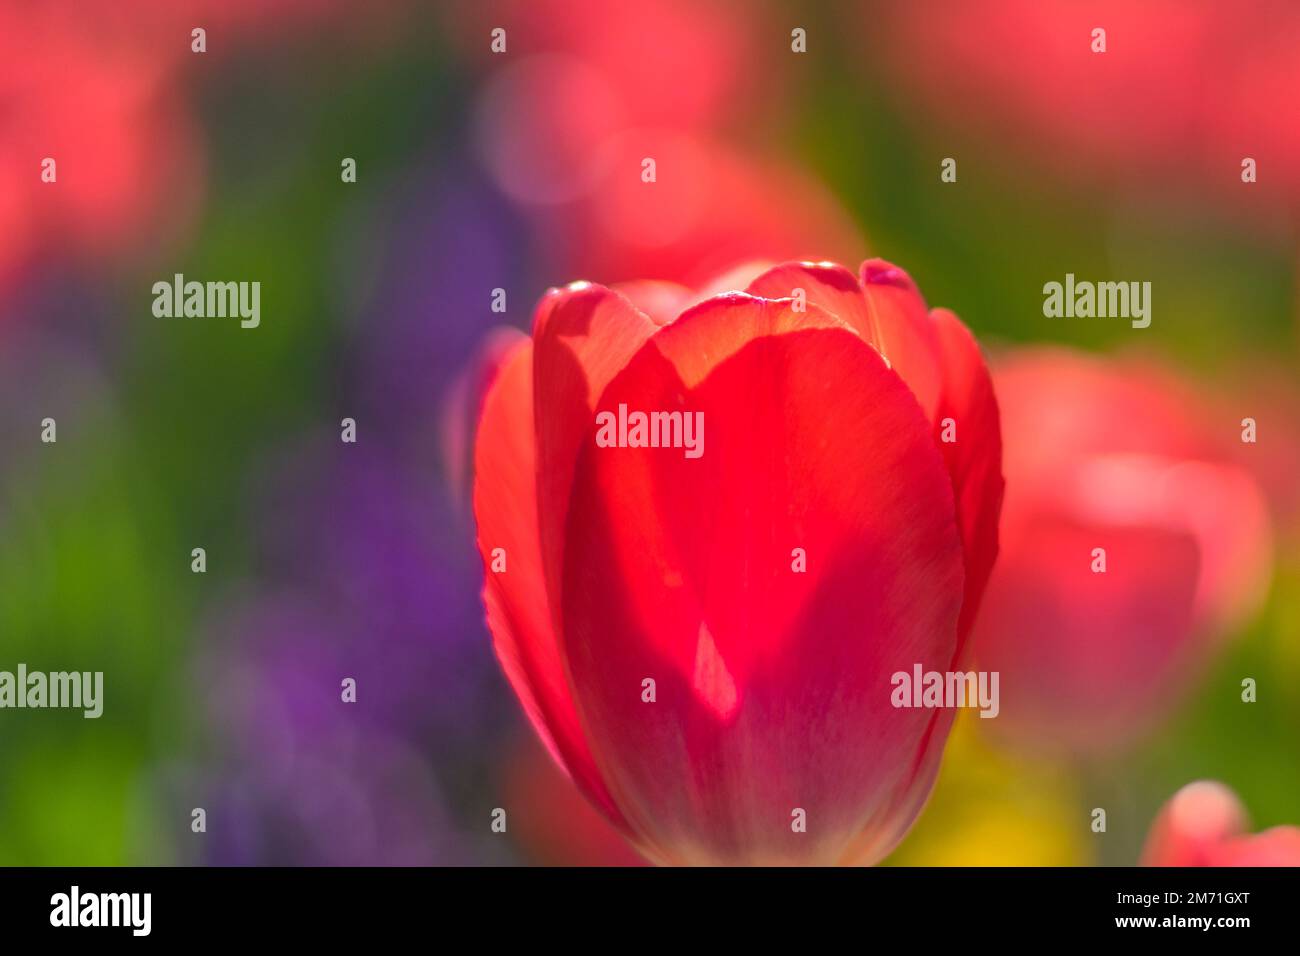 A beautiful red tulip in the foreground, a blurred tulip garden in the background Stock Photo